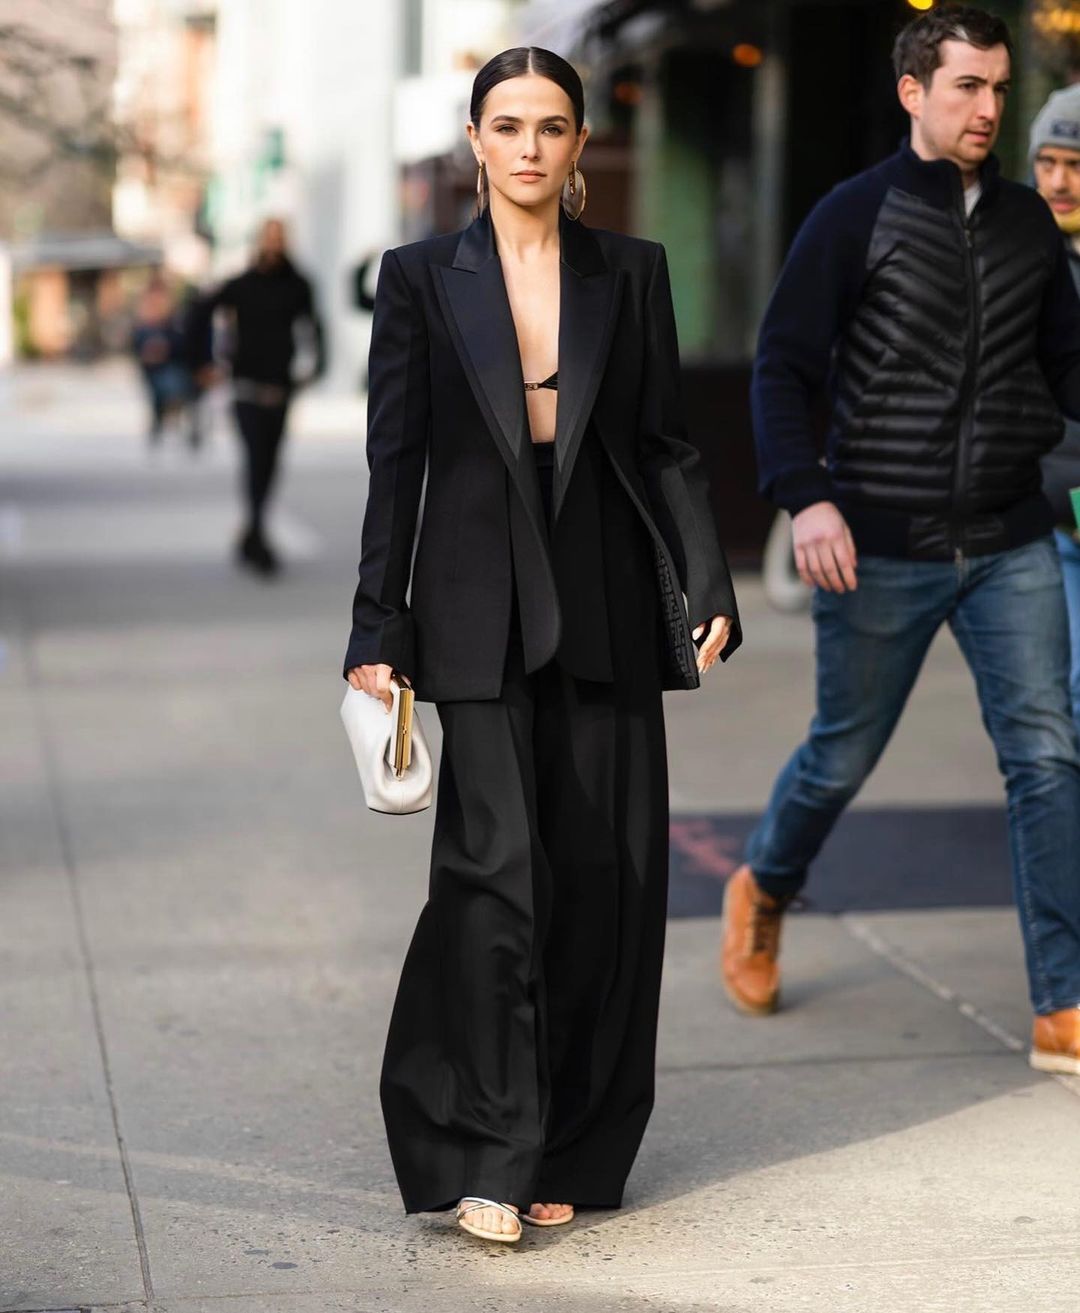 Zoey Slays The Power Dressing Look In A Black Smoking Suit